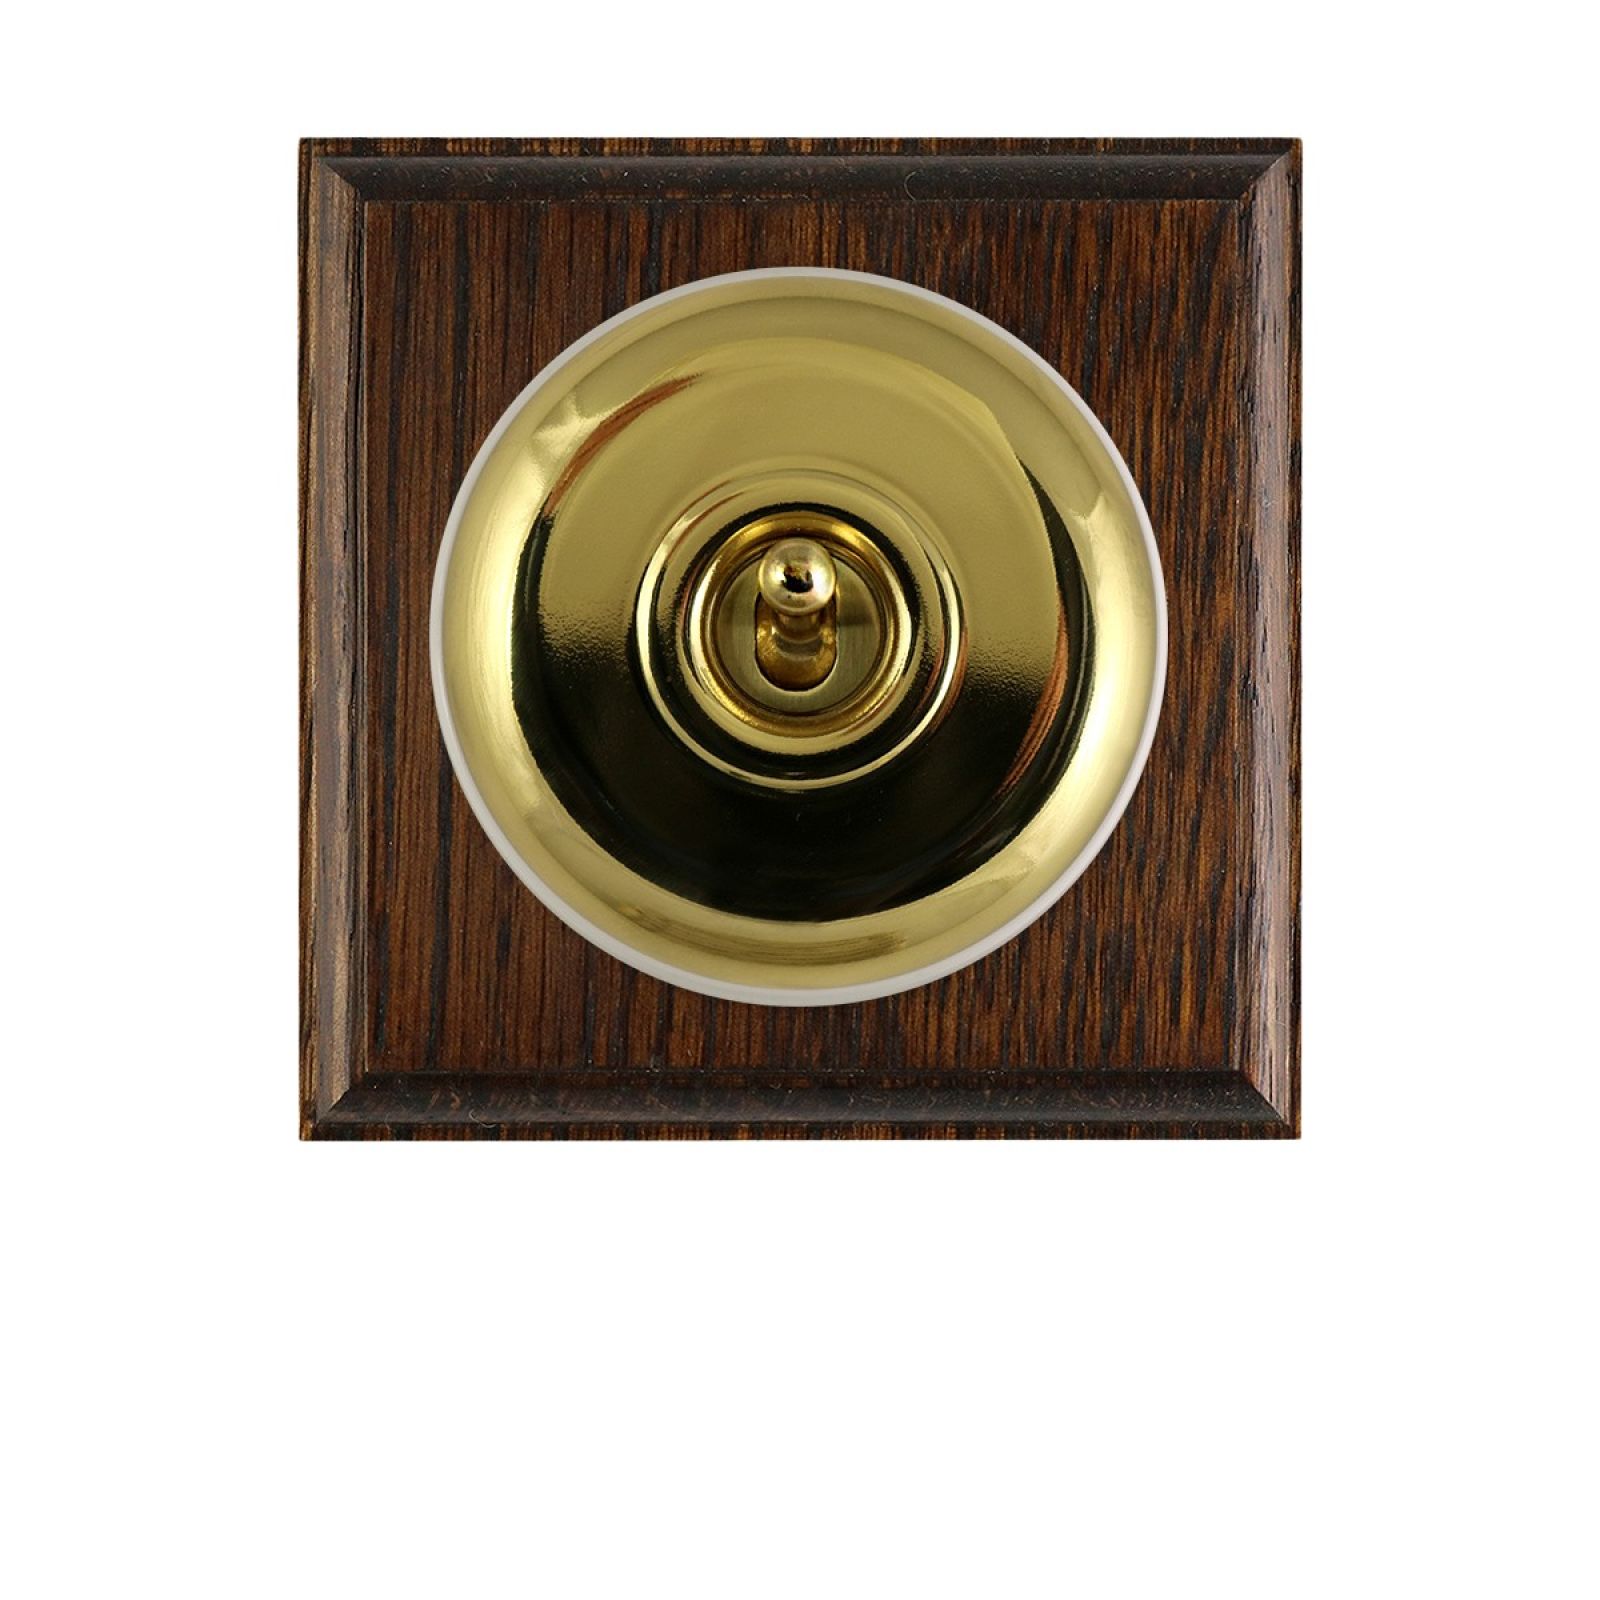 1 gang period light switch - square, plain in a choice of finishes